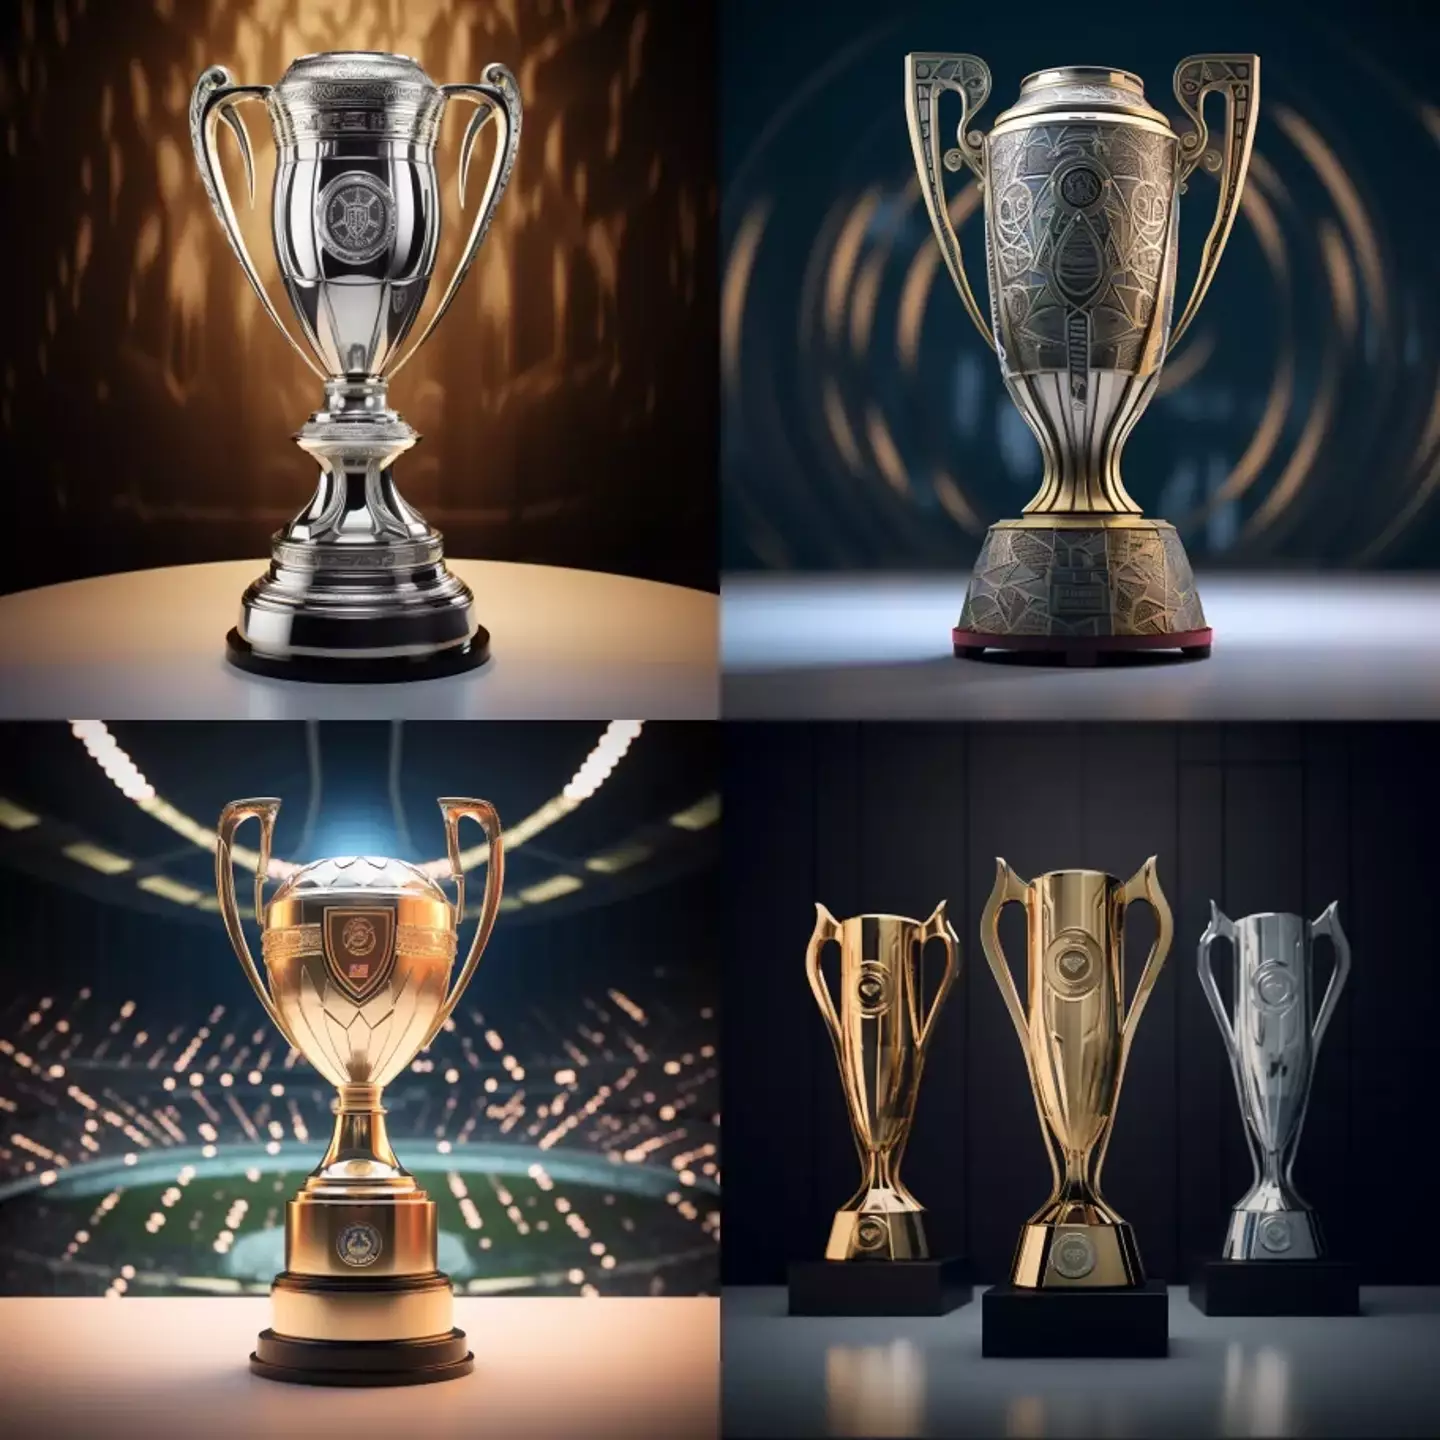 Ligue 1's future trophies, as imagined by AI.